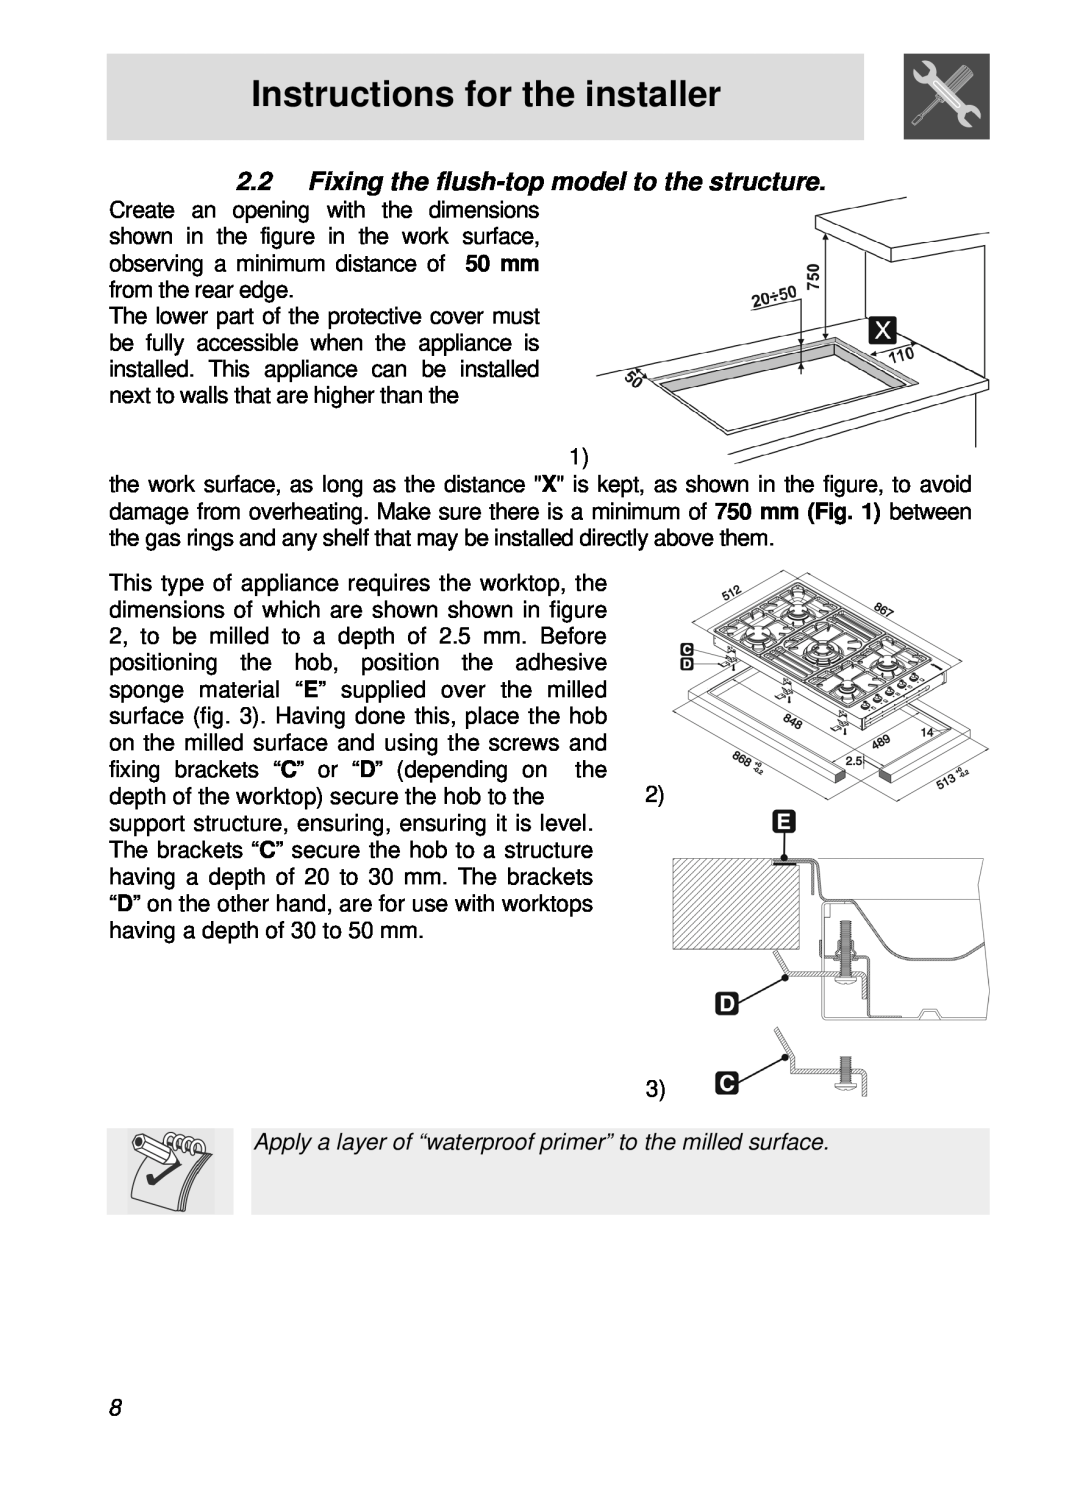 Smeg PGFA95F-1 manual 2.2Fixing the flush-topmodel to the structure, Instructions for the installer 